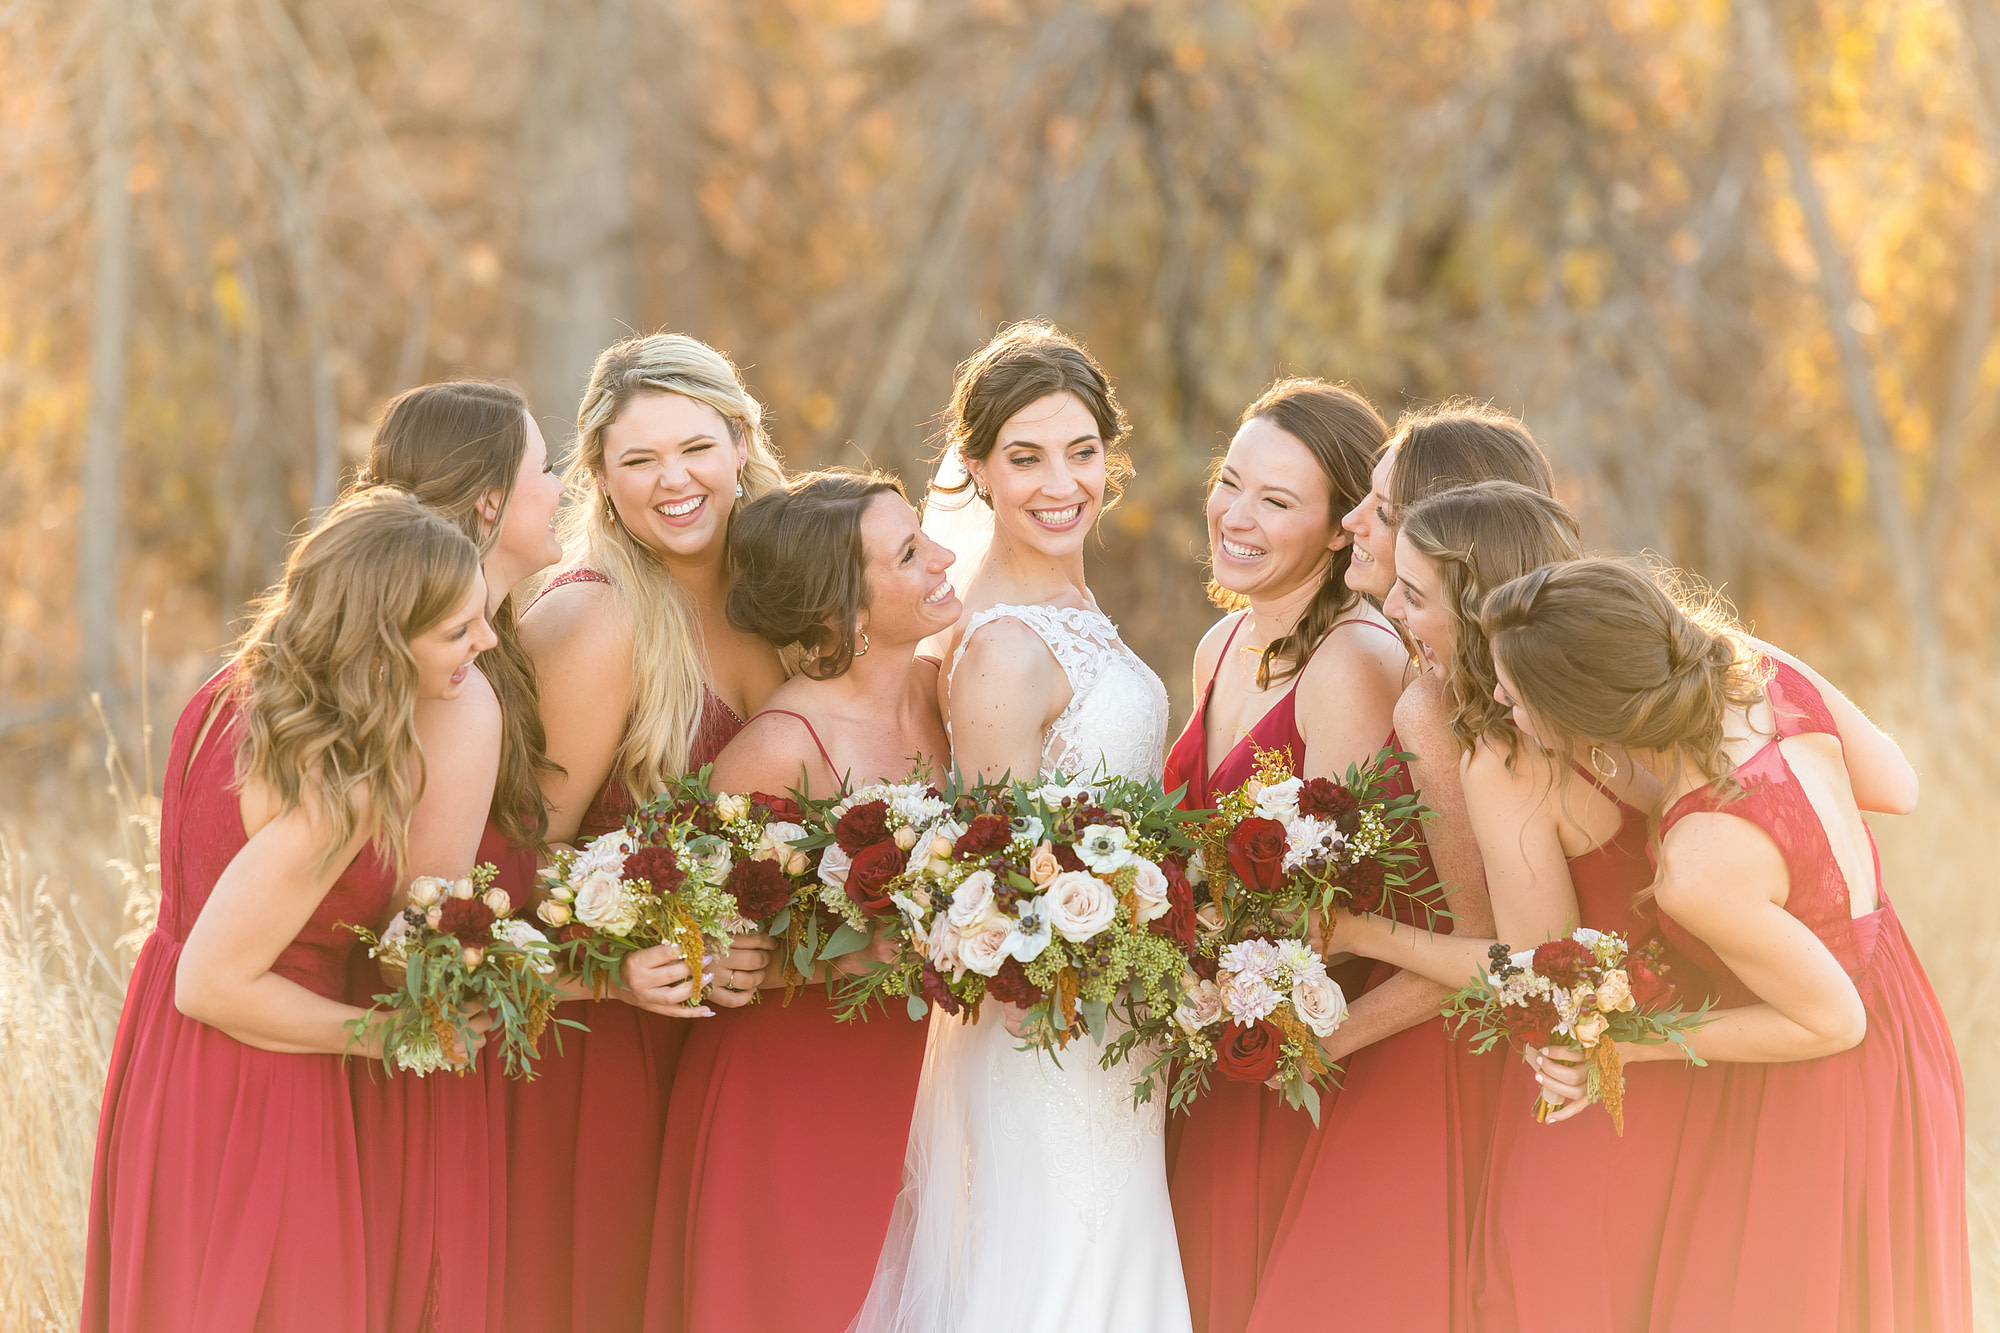 Bride poses with her bridesmaids at Cherry Creek State Park in Aurora, Colorado.